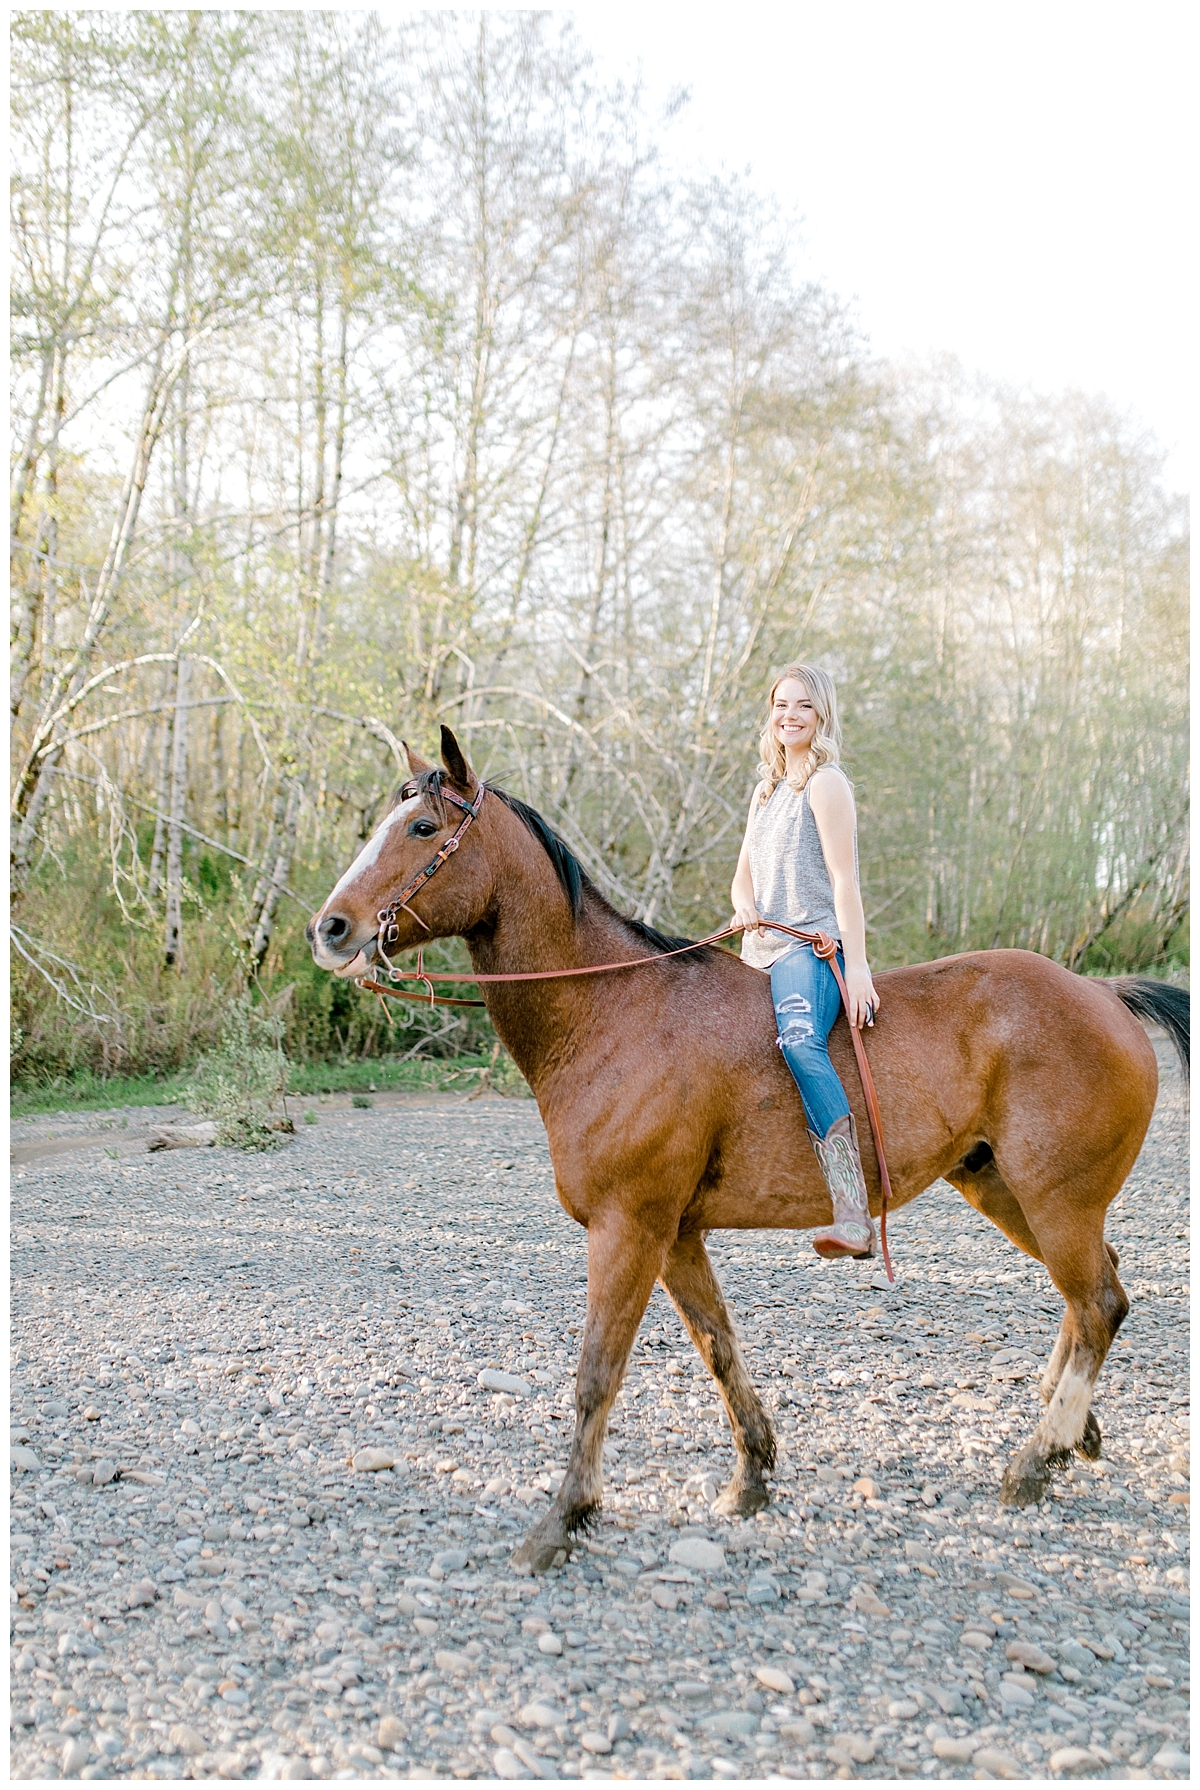 Sunset Senior Session with Horse | Senior Session Inspiration Session | Horse Photo Session | Pacific Northwest Light and Airy Wedding and Portrait Photographer | Emma Rose Company | Kindred Presets Horse.jpg